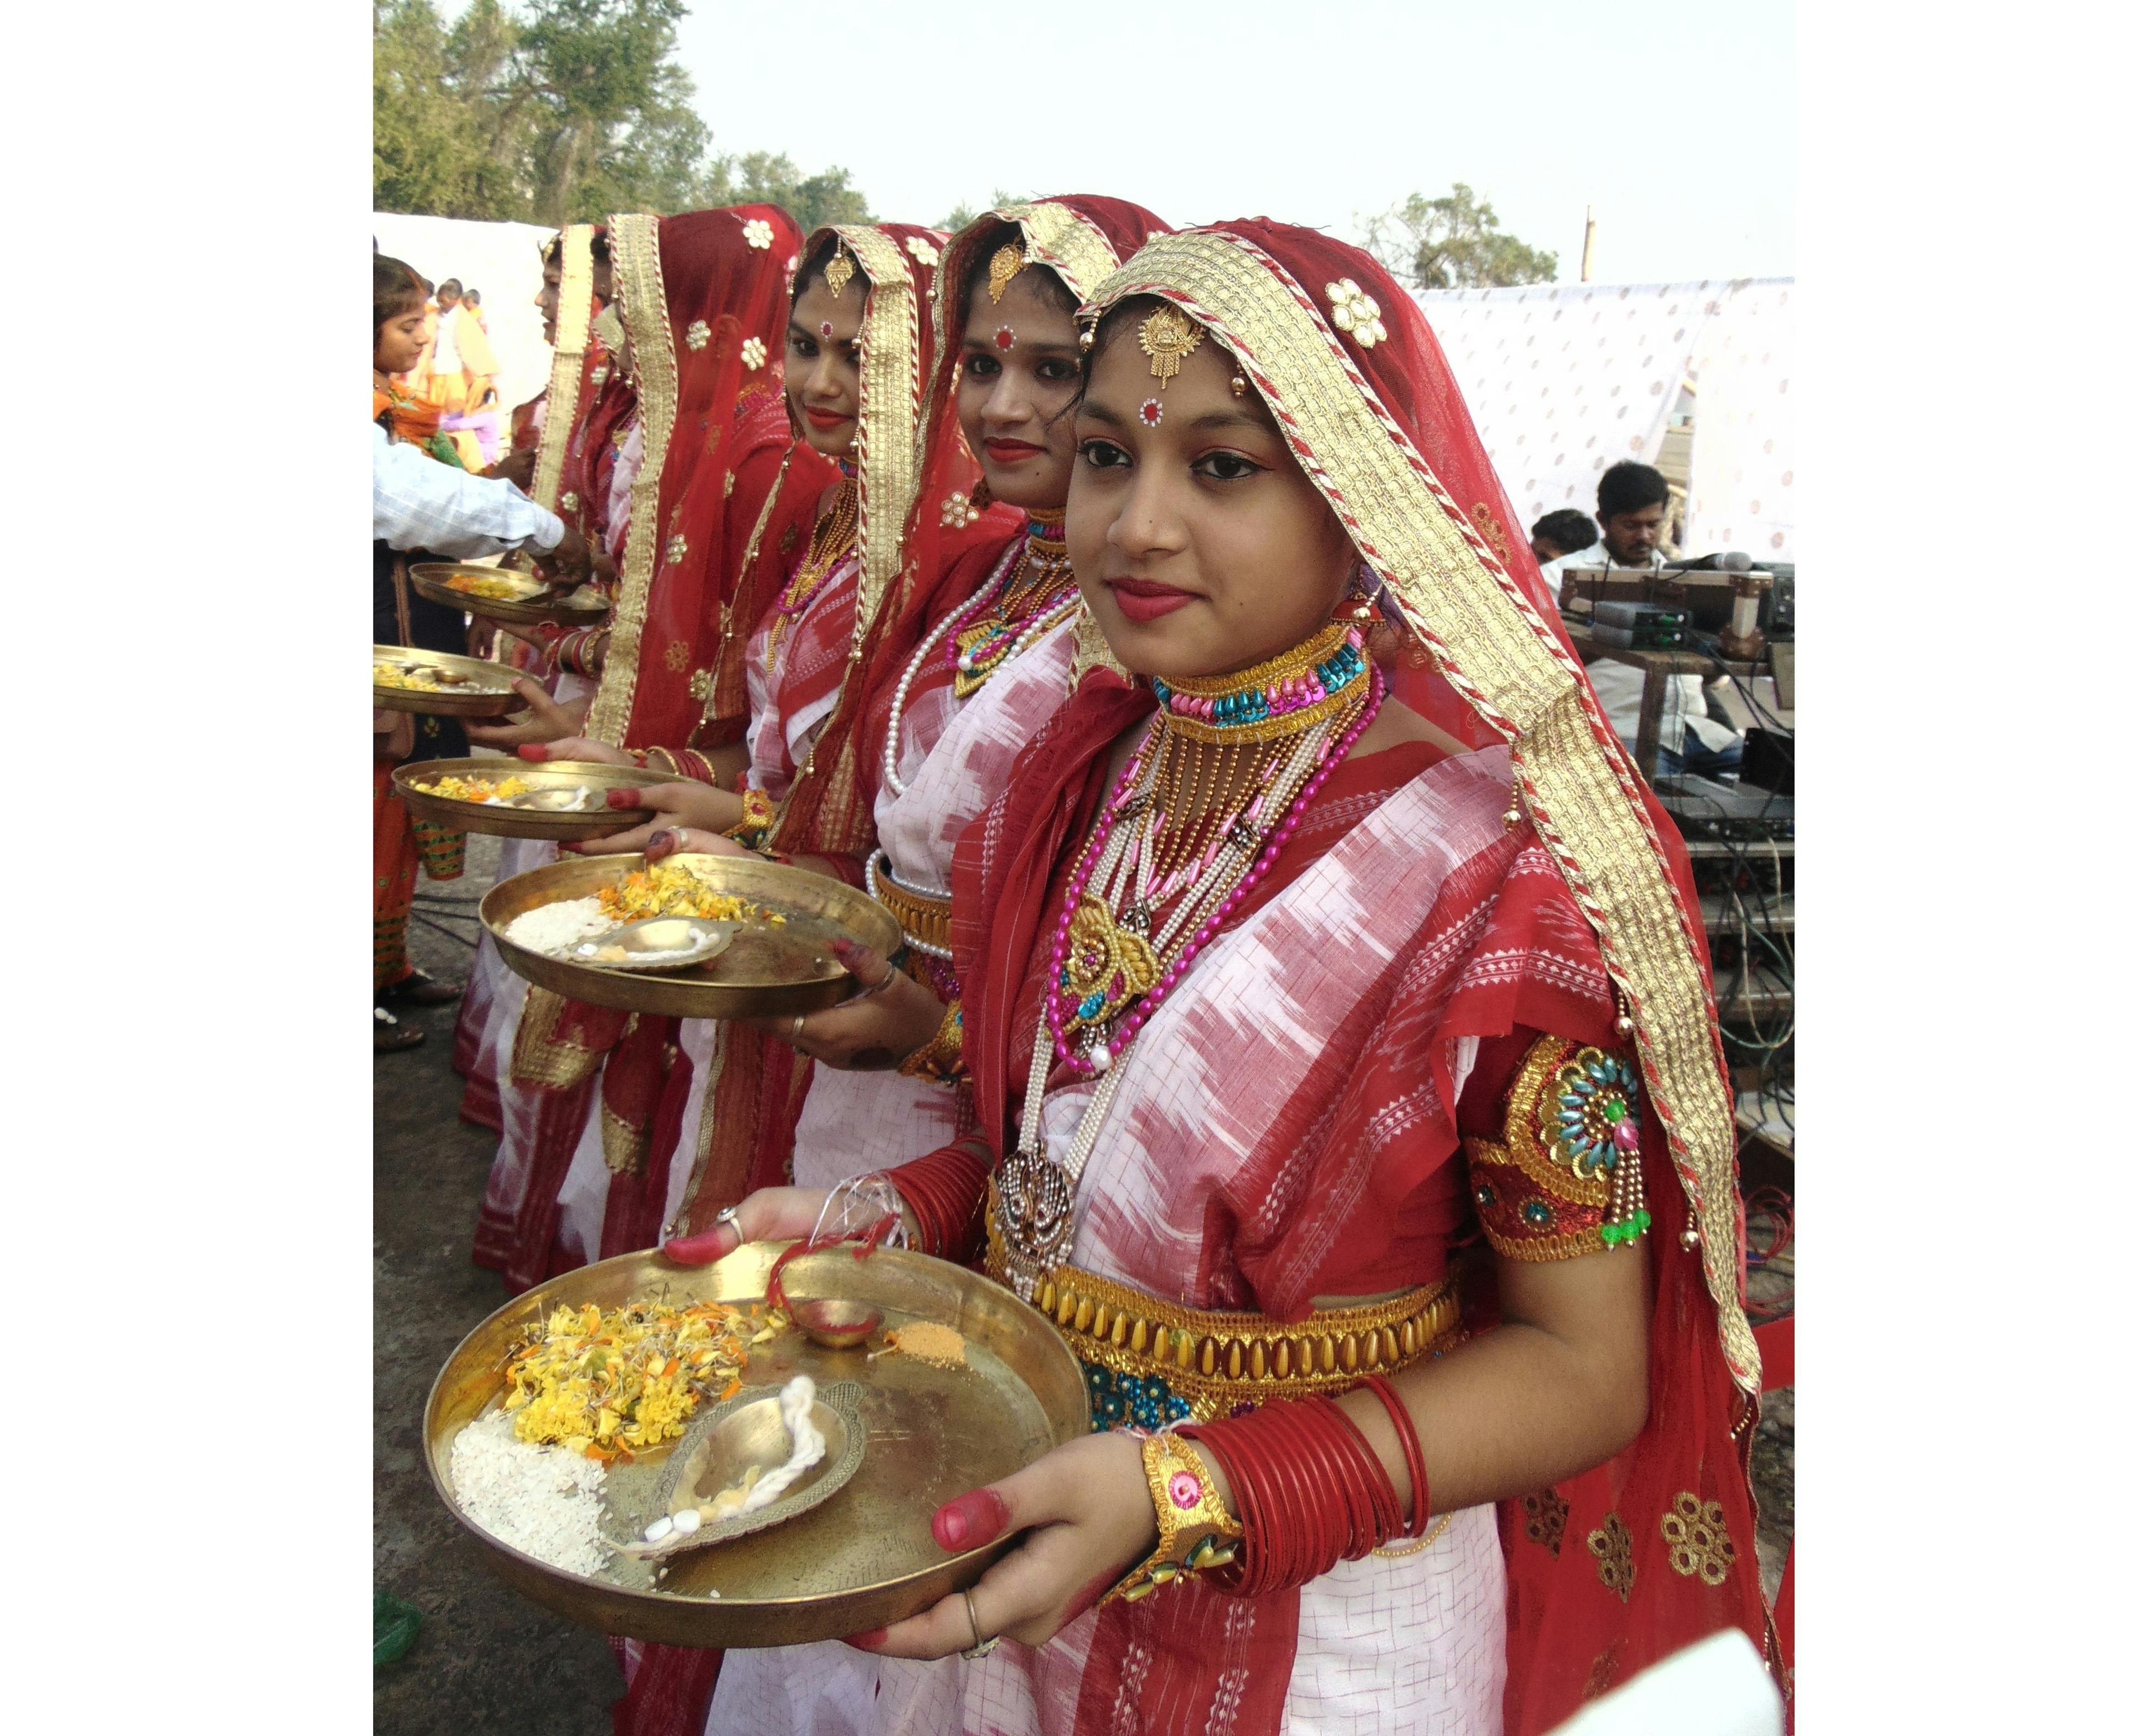 Young girls dressed up as wives of the merchants (sadhavani) bidding farewell to the merchants at Paradeep Port